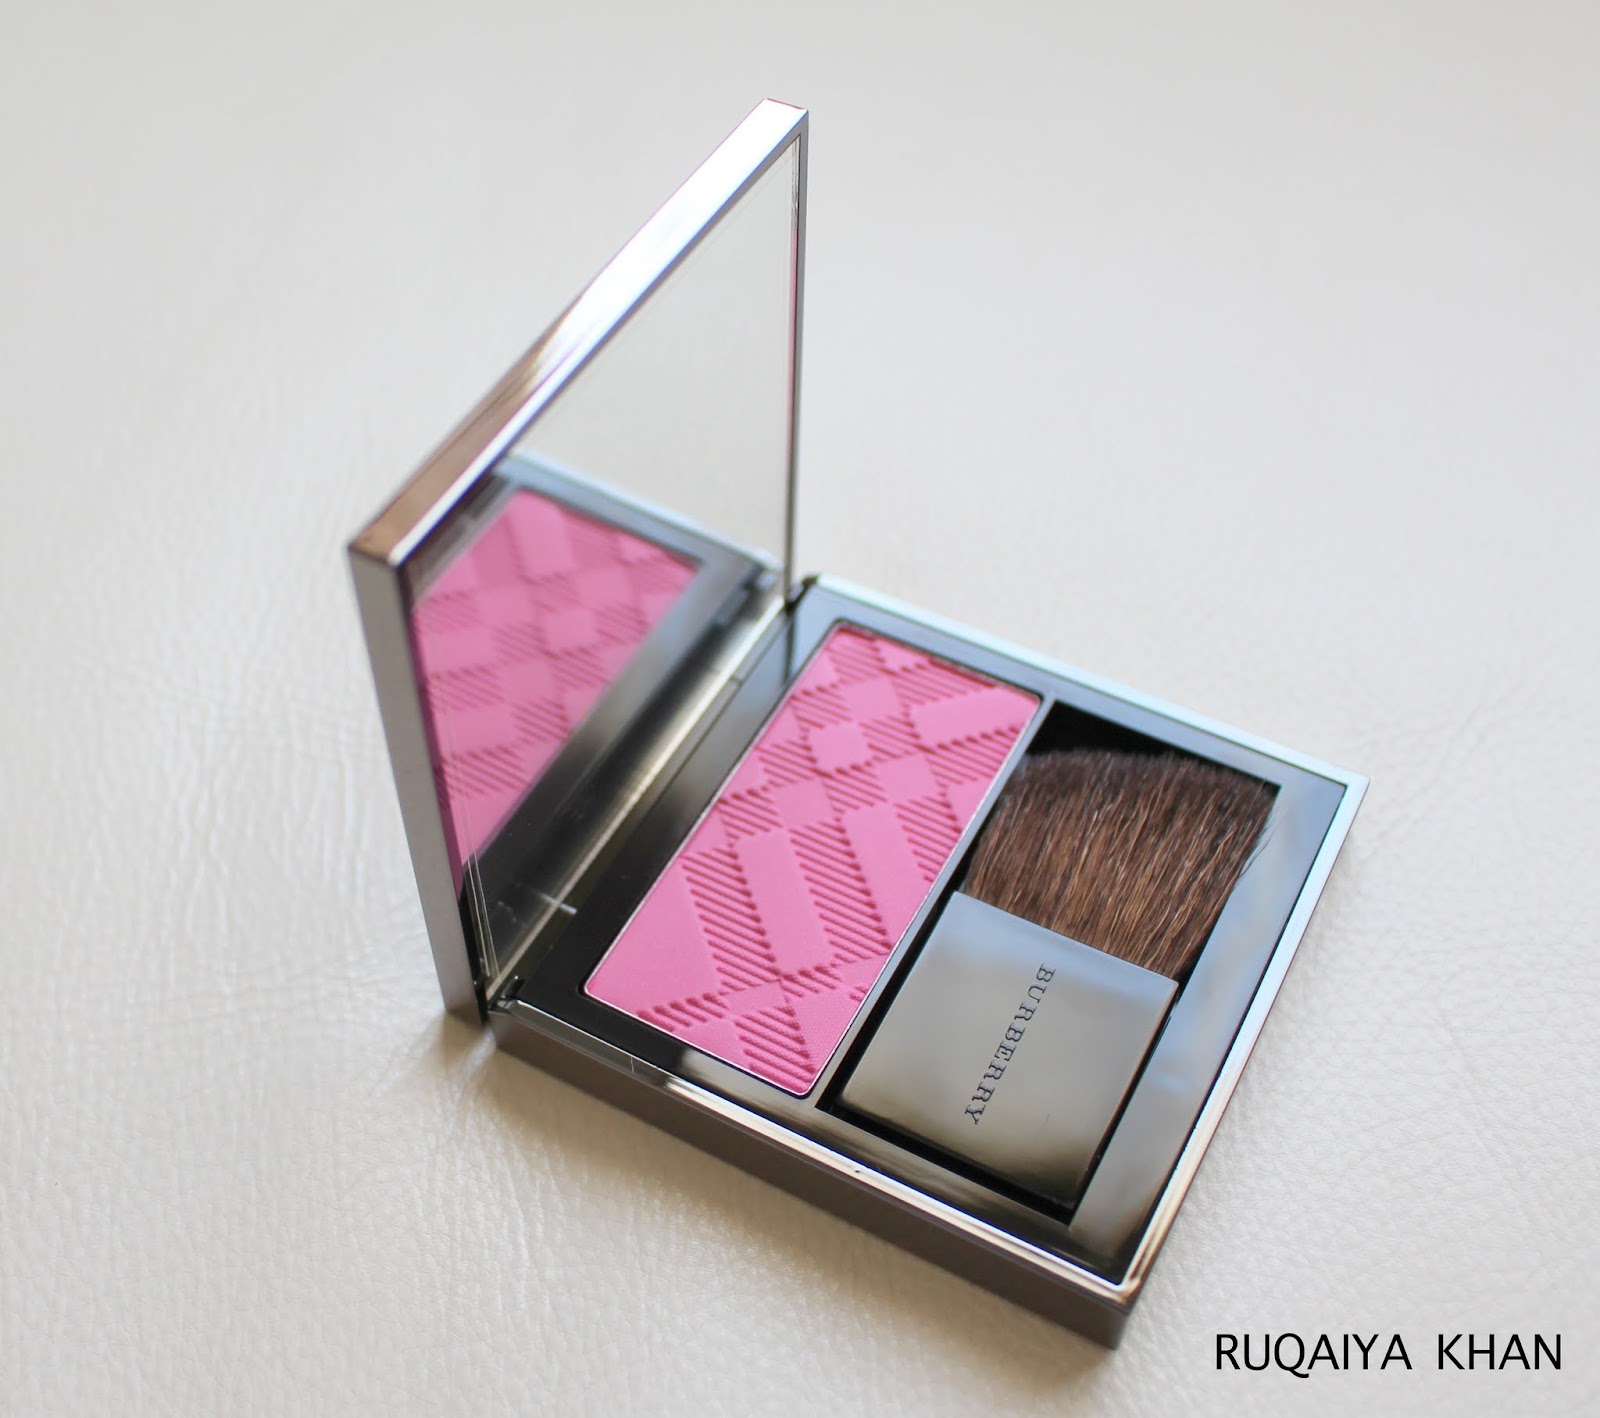 Ruqaiya Khan: BURBERRY Light Glow Blush in Coral Pink No. 9 Review and  Swatch